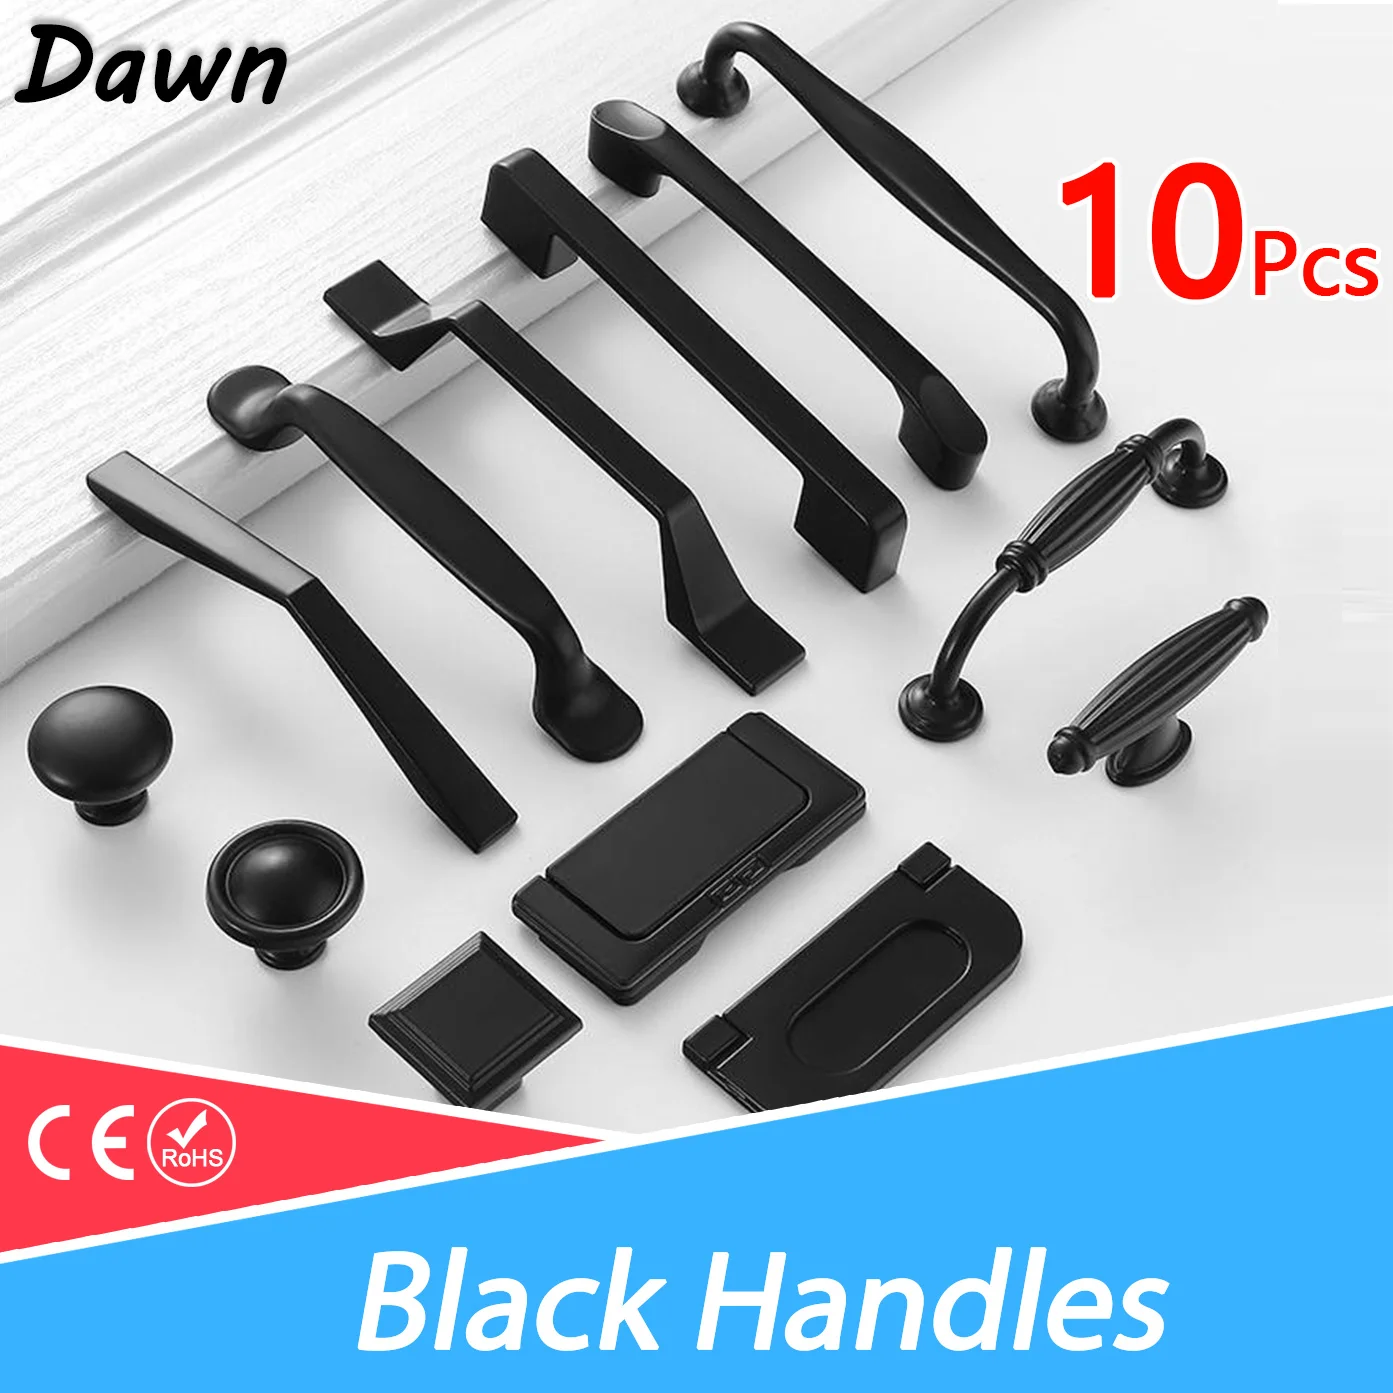 Black Handles for Furniture Cabinet Knobs and Drawer Knobs Cabinet Pulls Cupboard Handles Knobs and Kitchen Handles simple style